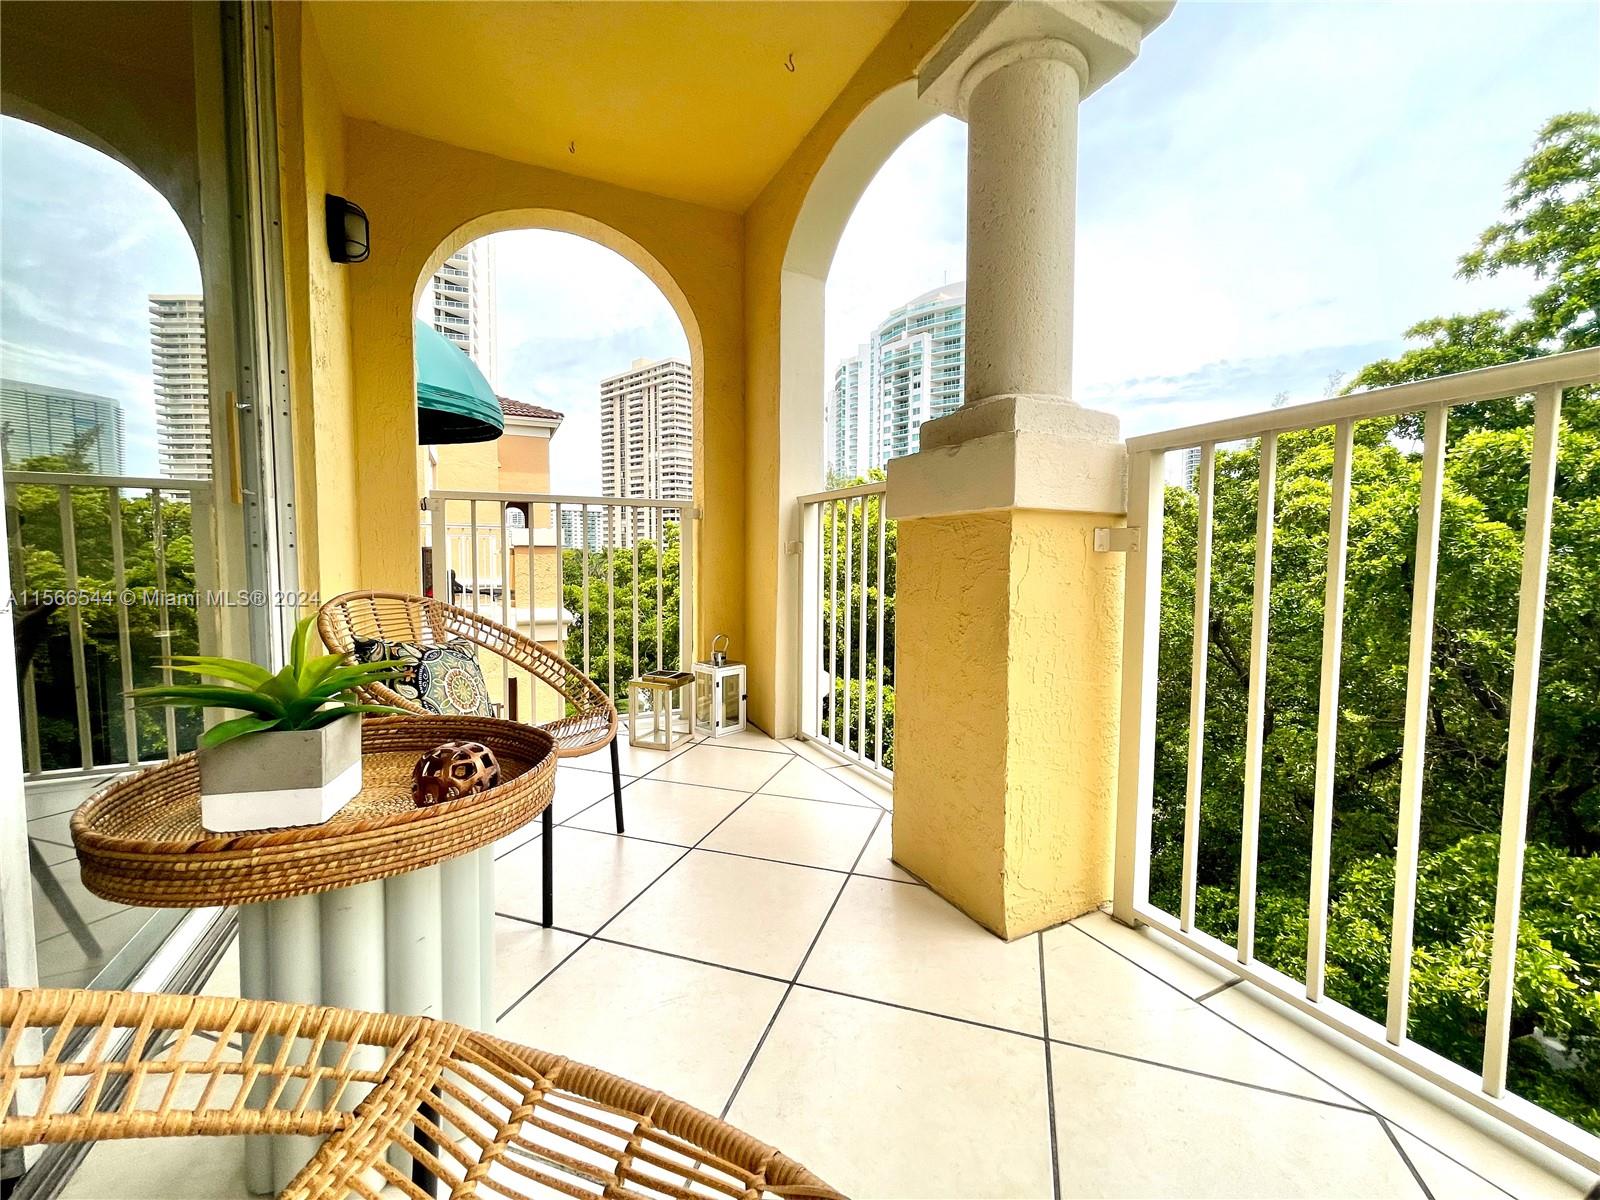 19555 E Country Club Dr Unit 8608, Aventura, Florida, 33180, United States, 2 Bedrooms Bedrooms, ,2 BathroomsBathrooms,Residential,For Sale,19555 E Country Club Dr Unit 8608,1505513